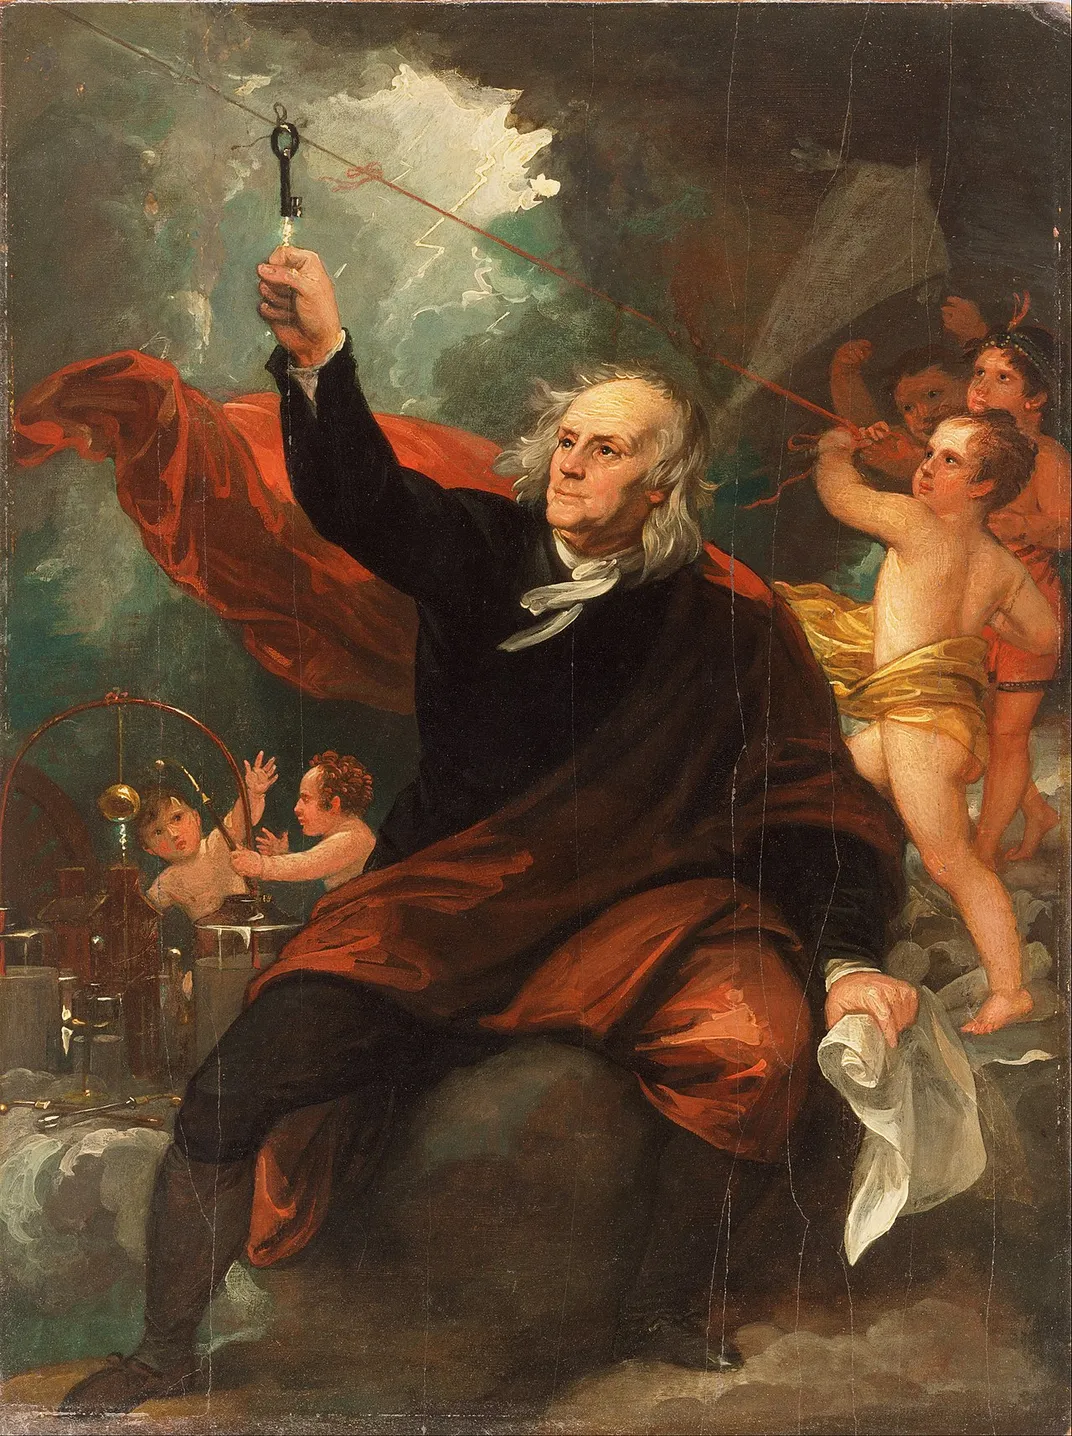 When Benjamin Franklin was shocked by trying to electrocute a turkey